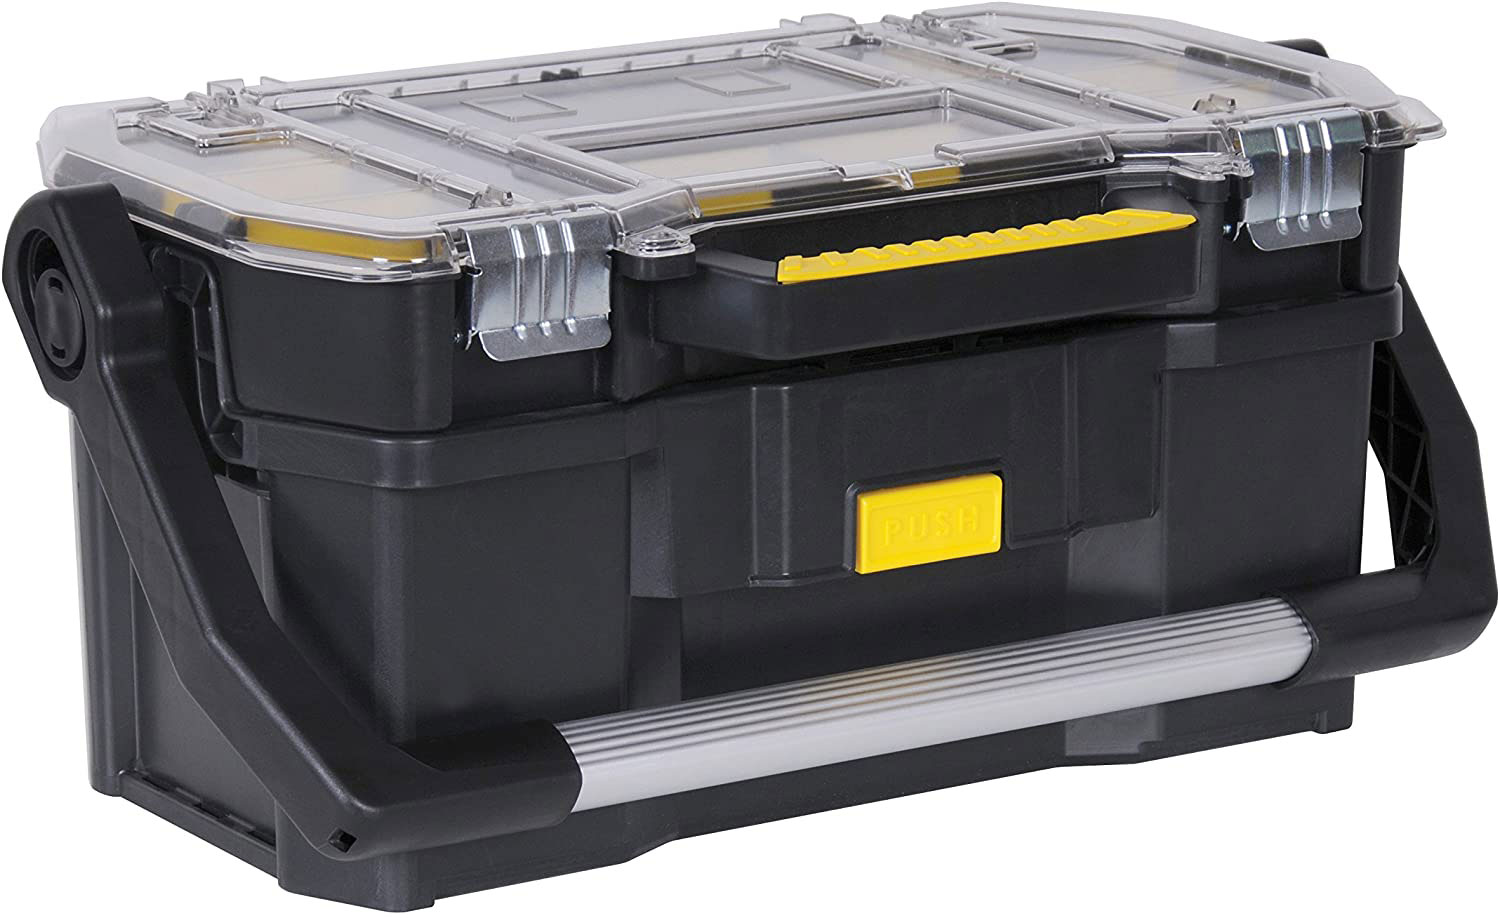 STANLEY STST1-70317 19'' TOOL TOTE AND ORGANISER BOX 55.6X32X24.9CM